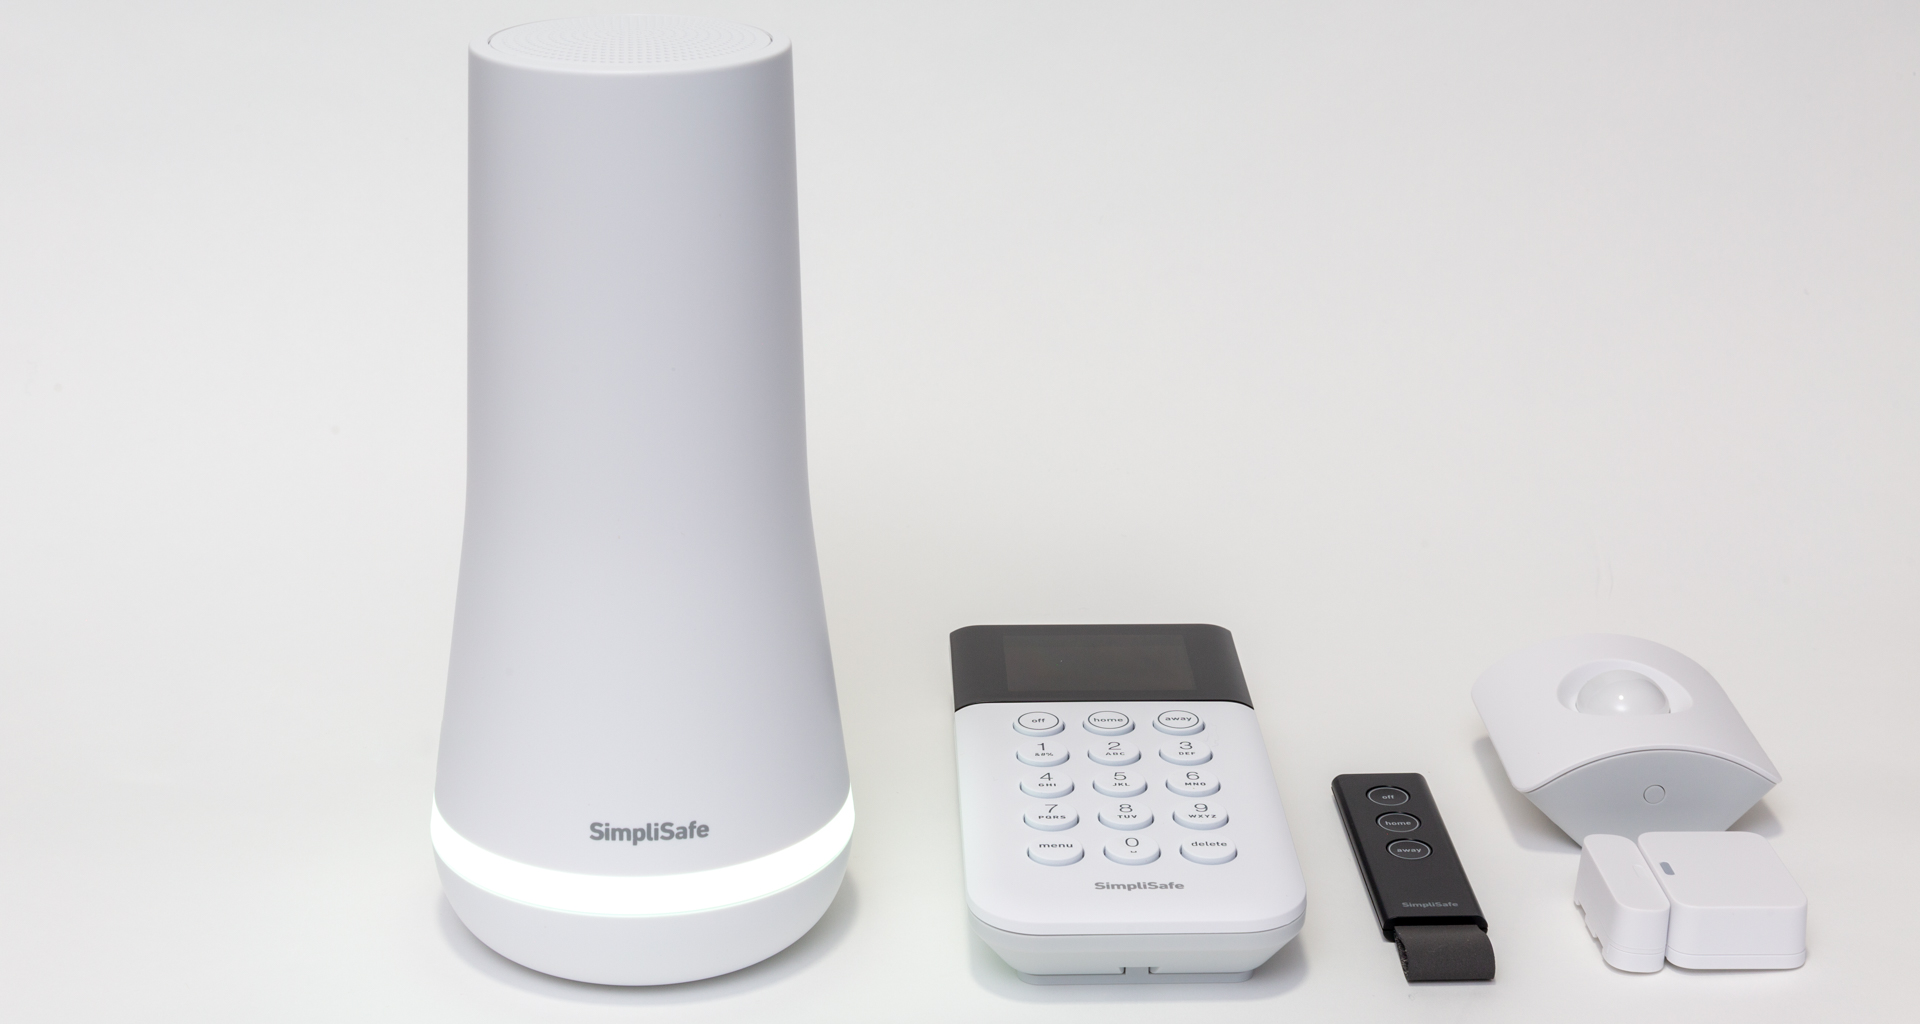 In the realm of DIY home security systems, SimpliSafe offers multiple packages as well as individual components to enable a tailored system. Professional monitoring is also available for a monthly fee. Image: Digitized House Media.